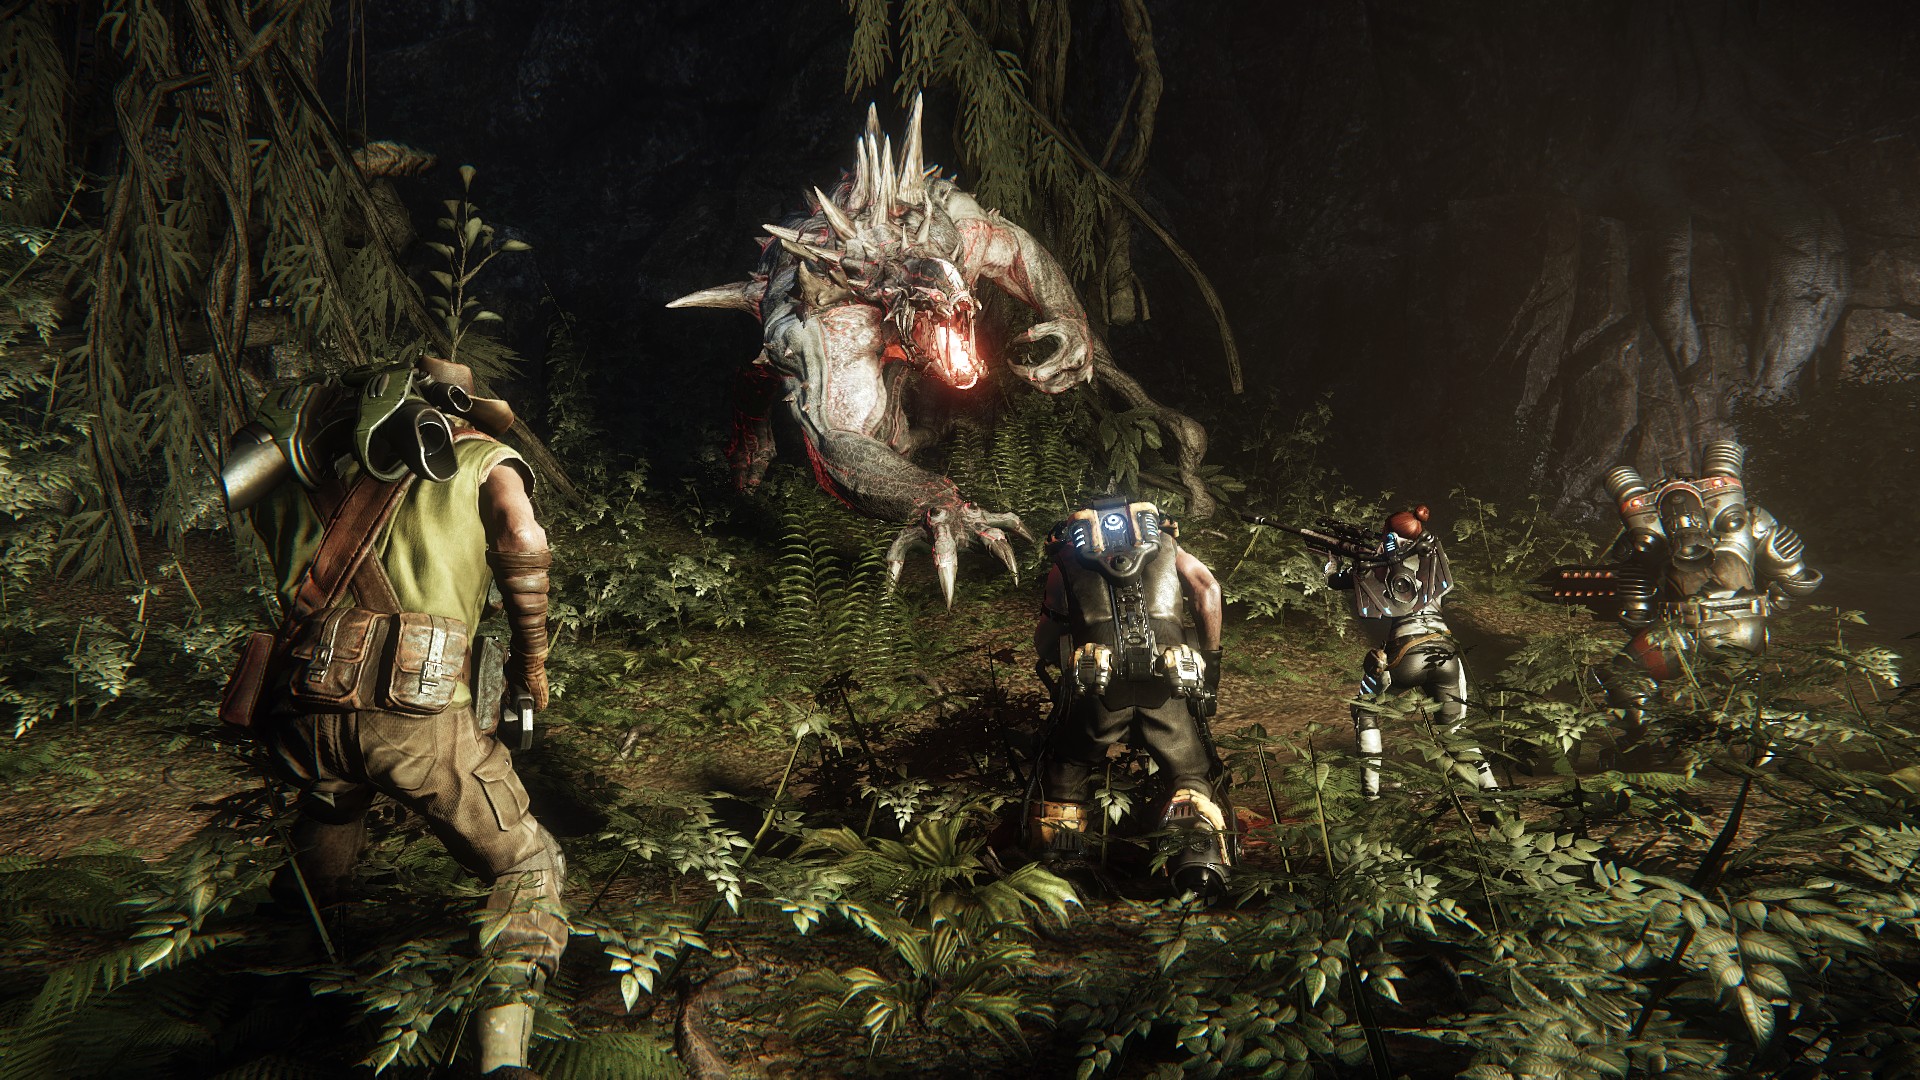 Evolve is a game that gets almost everything right. After spending time with the alpha, beta and now final retail release of the game, I'm now confident in ...